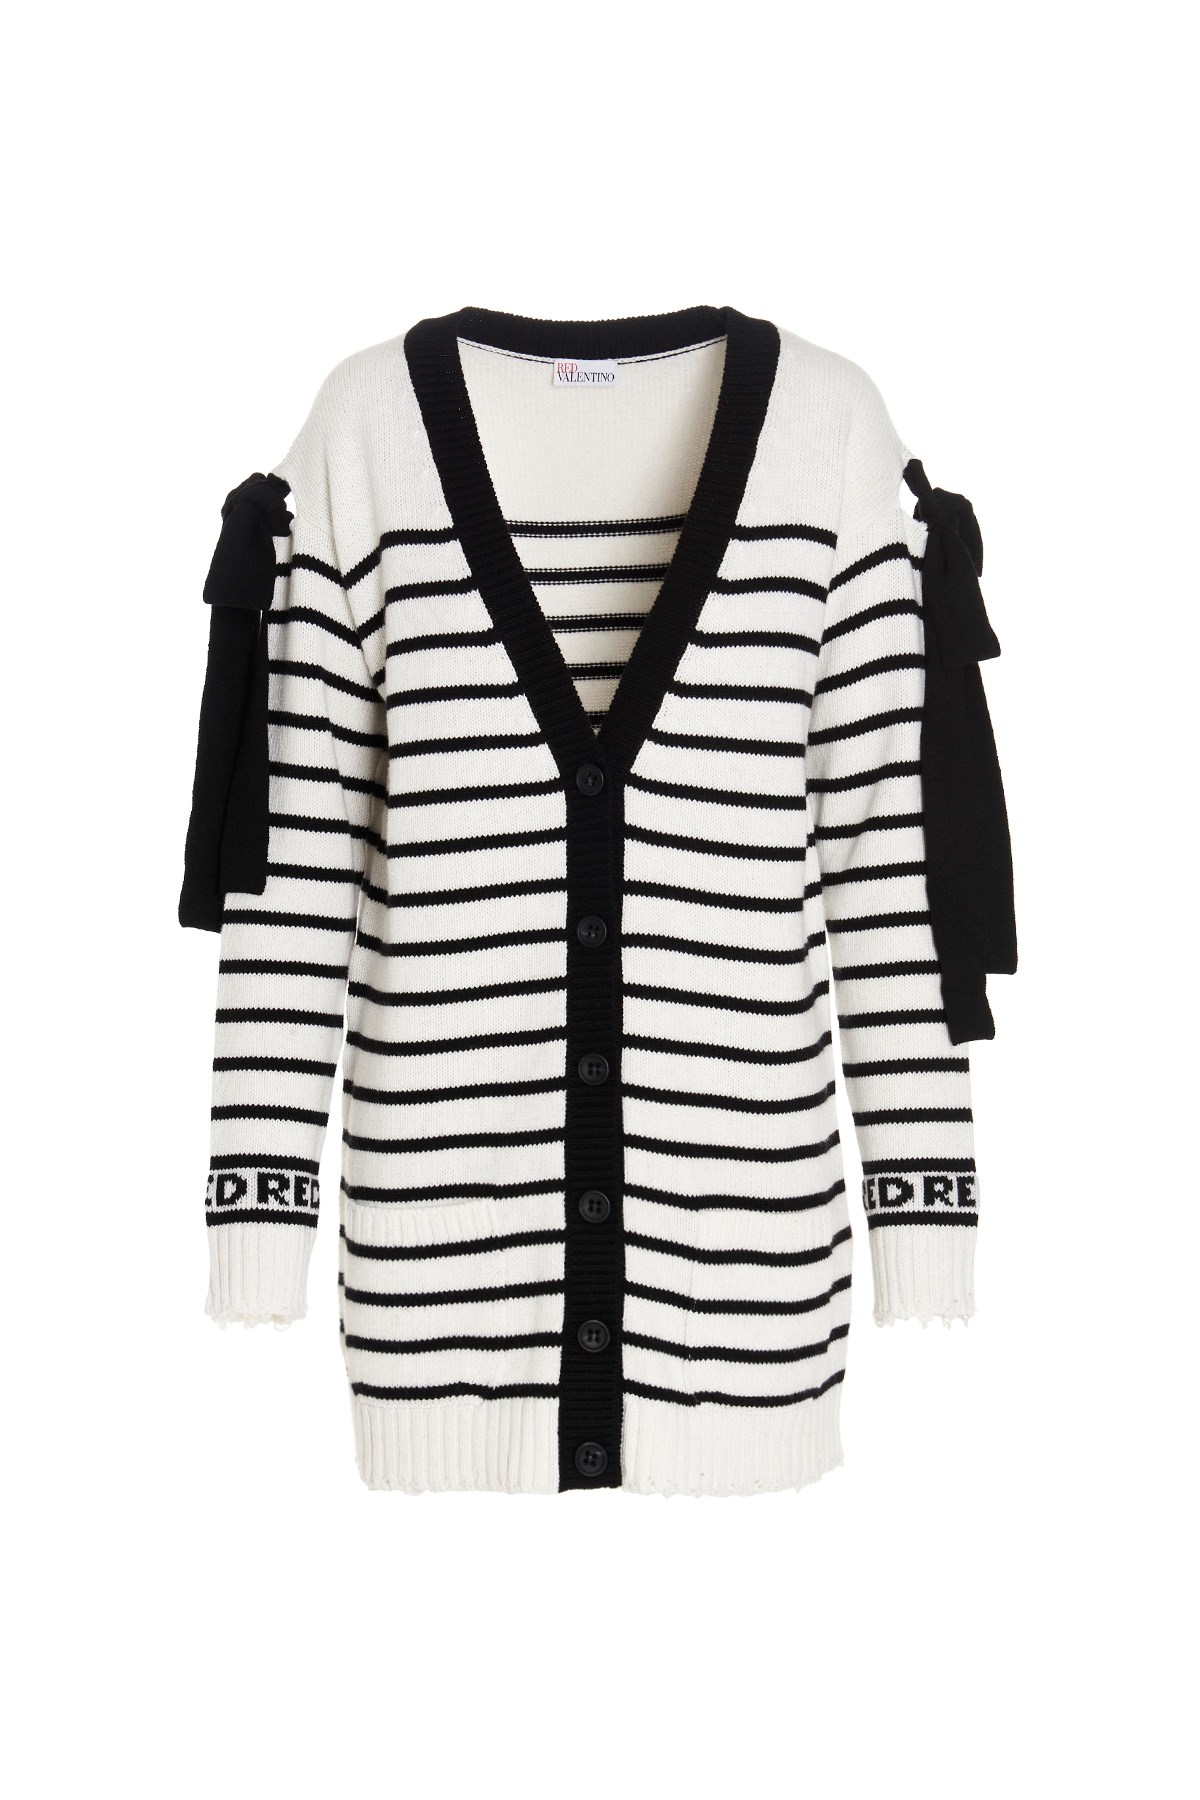 REDVALENTINO Cut-Out Detail Striped Cardigan